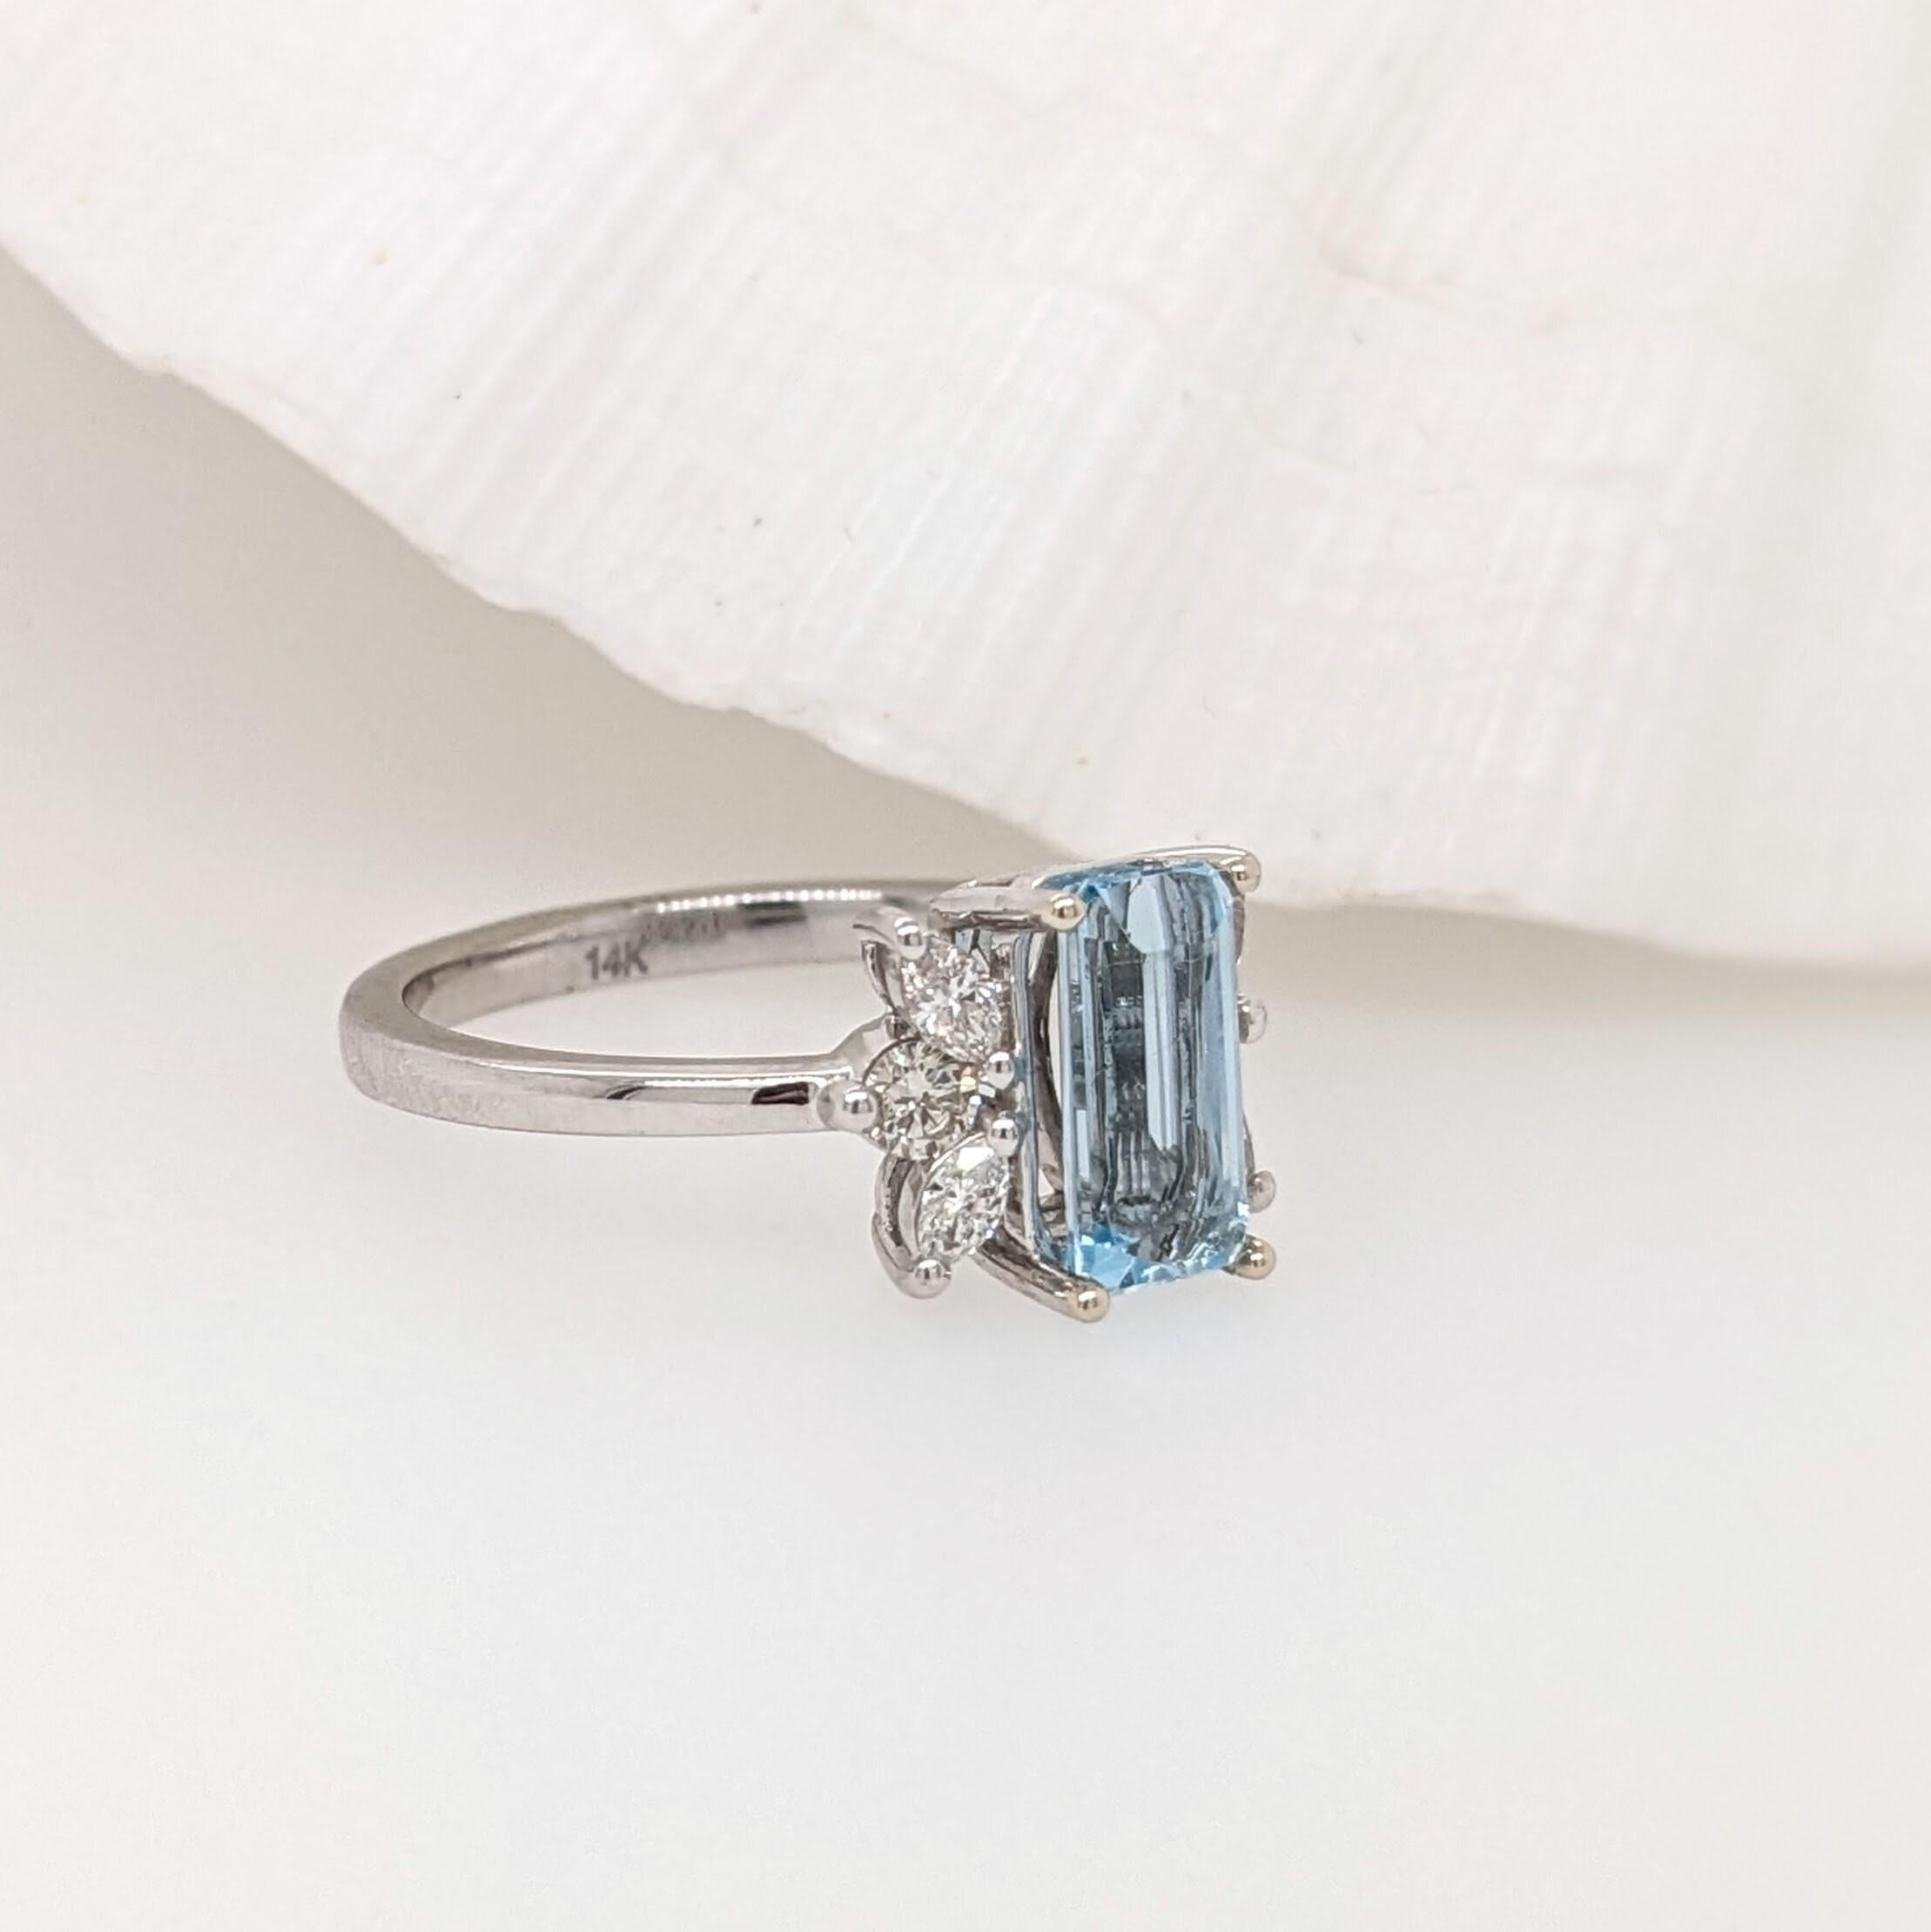 Emerald Cut Lovely Aquamarine Ring in Solid 14K White Gold with a Halo of Natural Diamonds For Sale